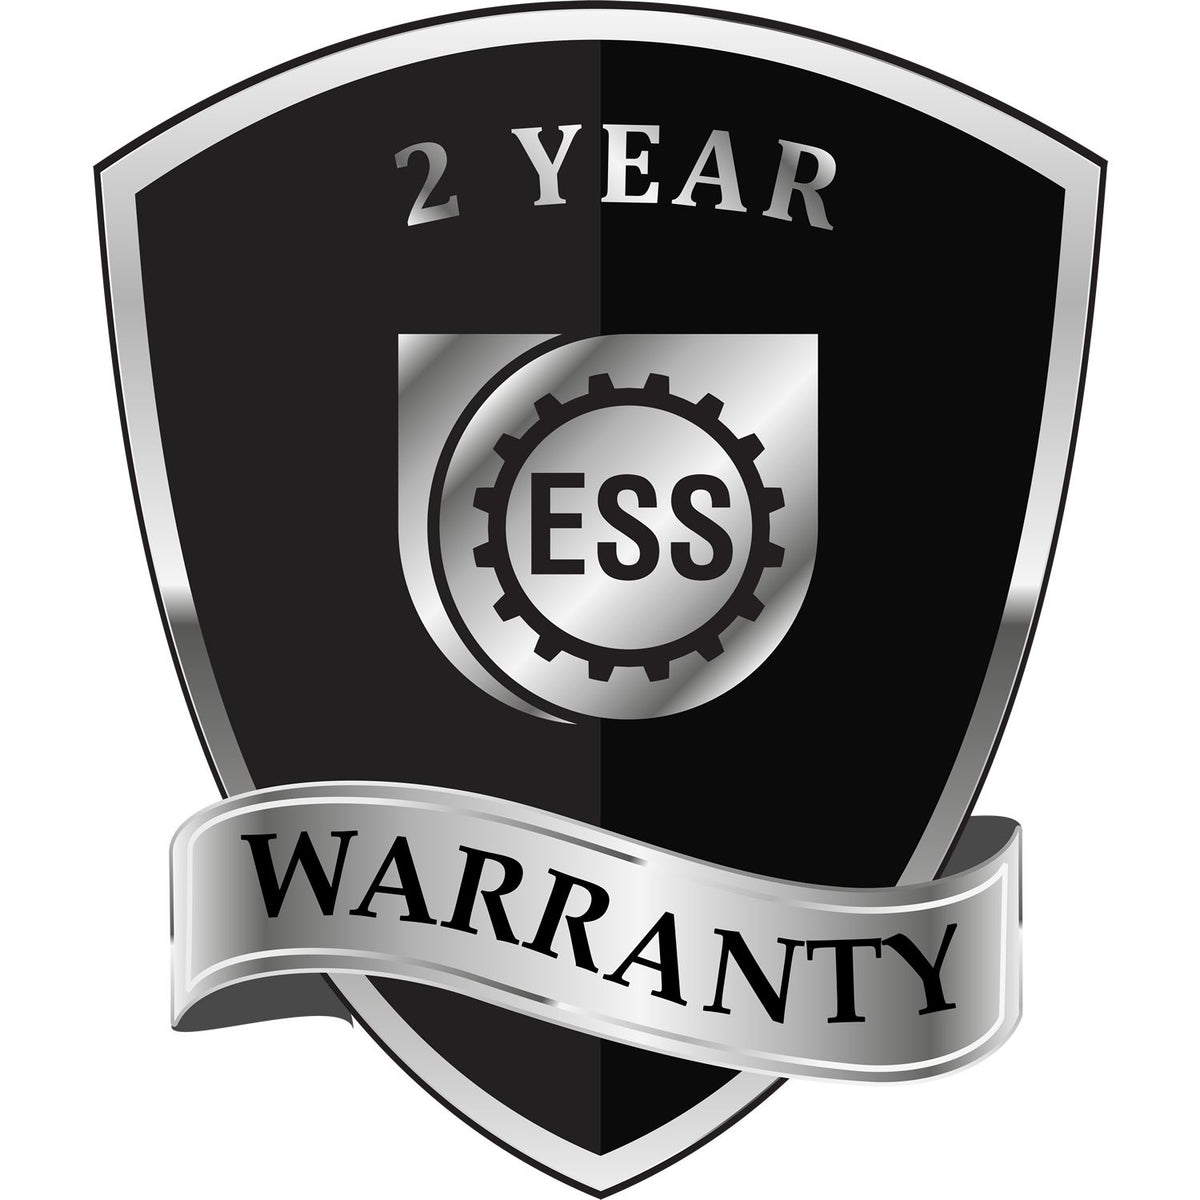 A badge or emblem showing a warranty icon for the Heavy Duty Cast Iron Iowa Engineer Seal Embosser